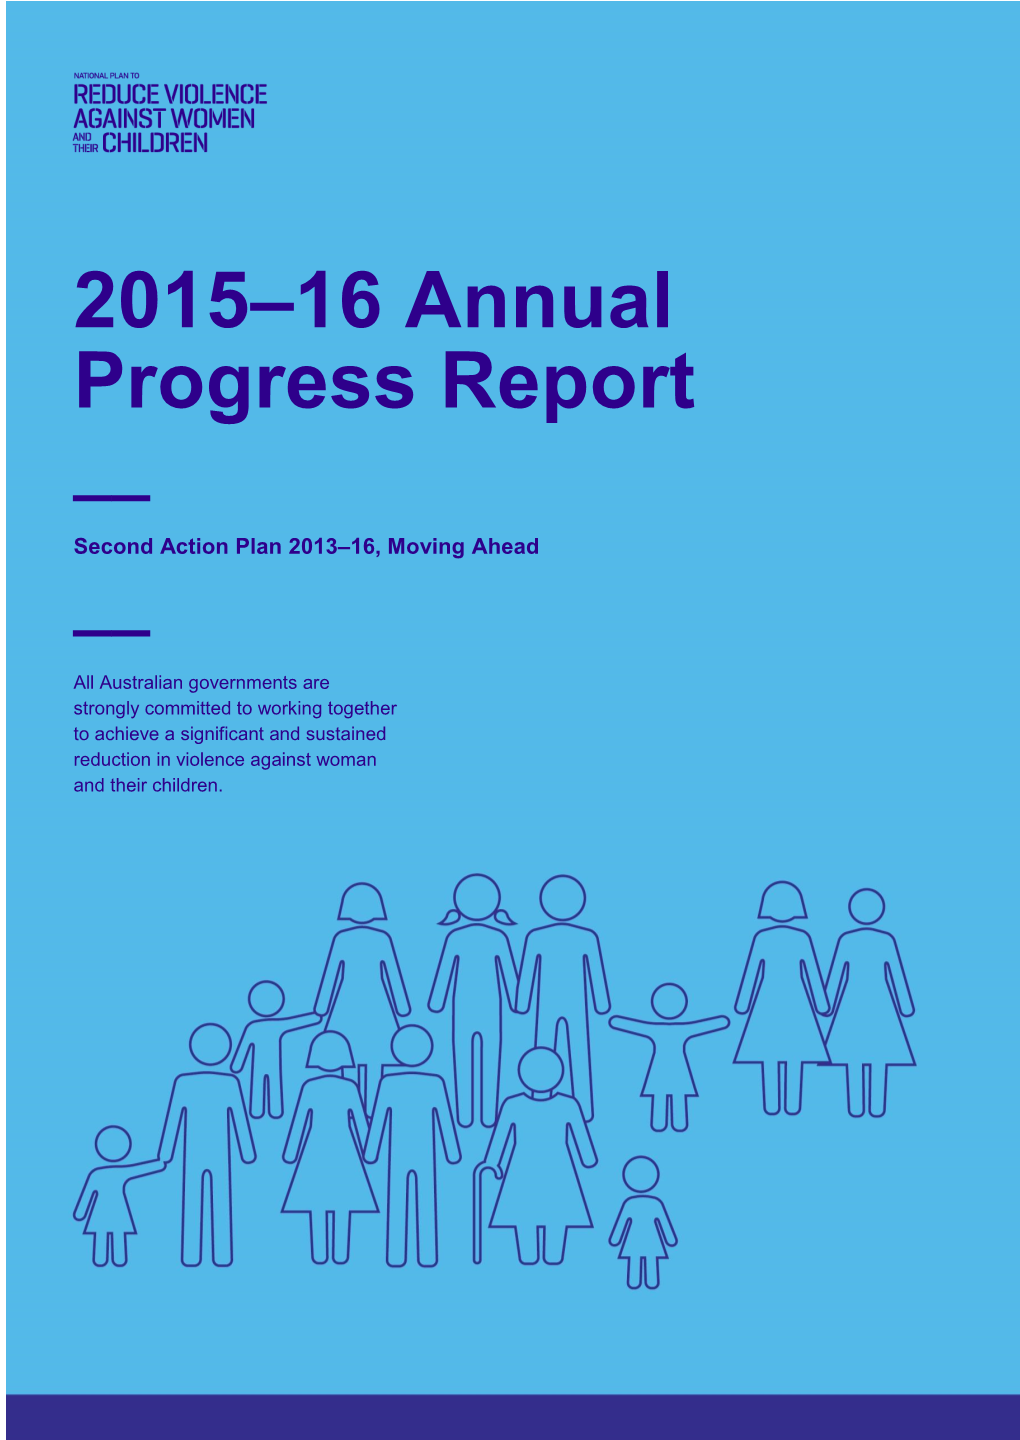 2015–16 Annual Progress Report of the Second Action Plan 2013–2016